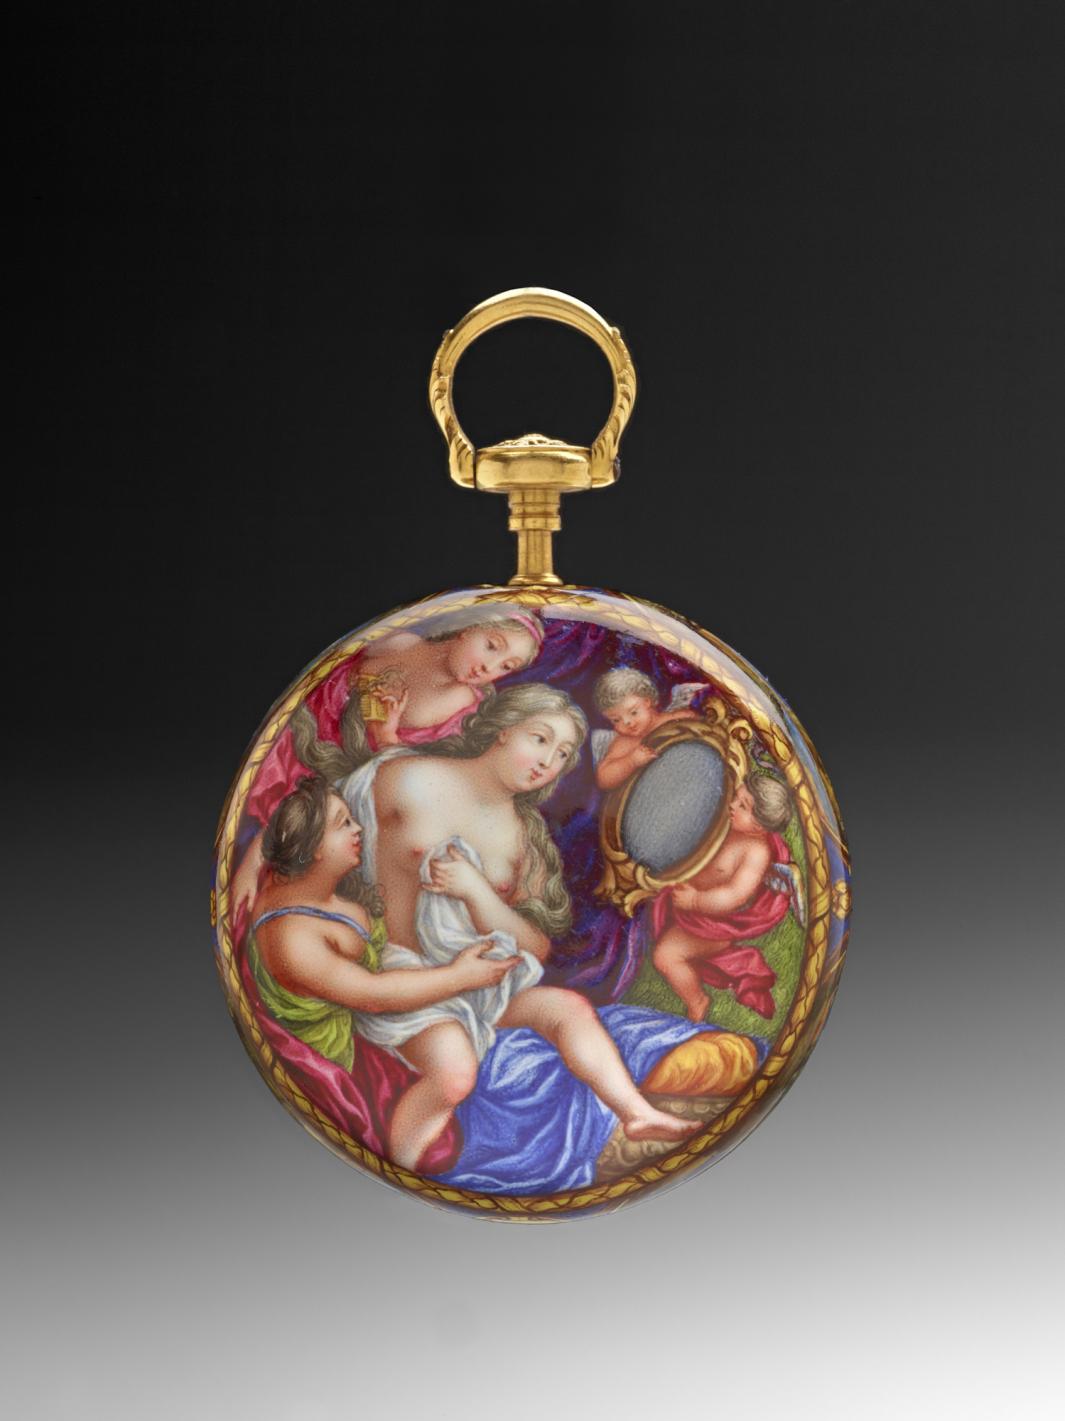 back of gold and enamel watch depicting "The Toilet of Venus", a half nude woman gazing in mirror with others helping